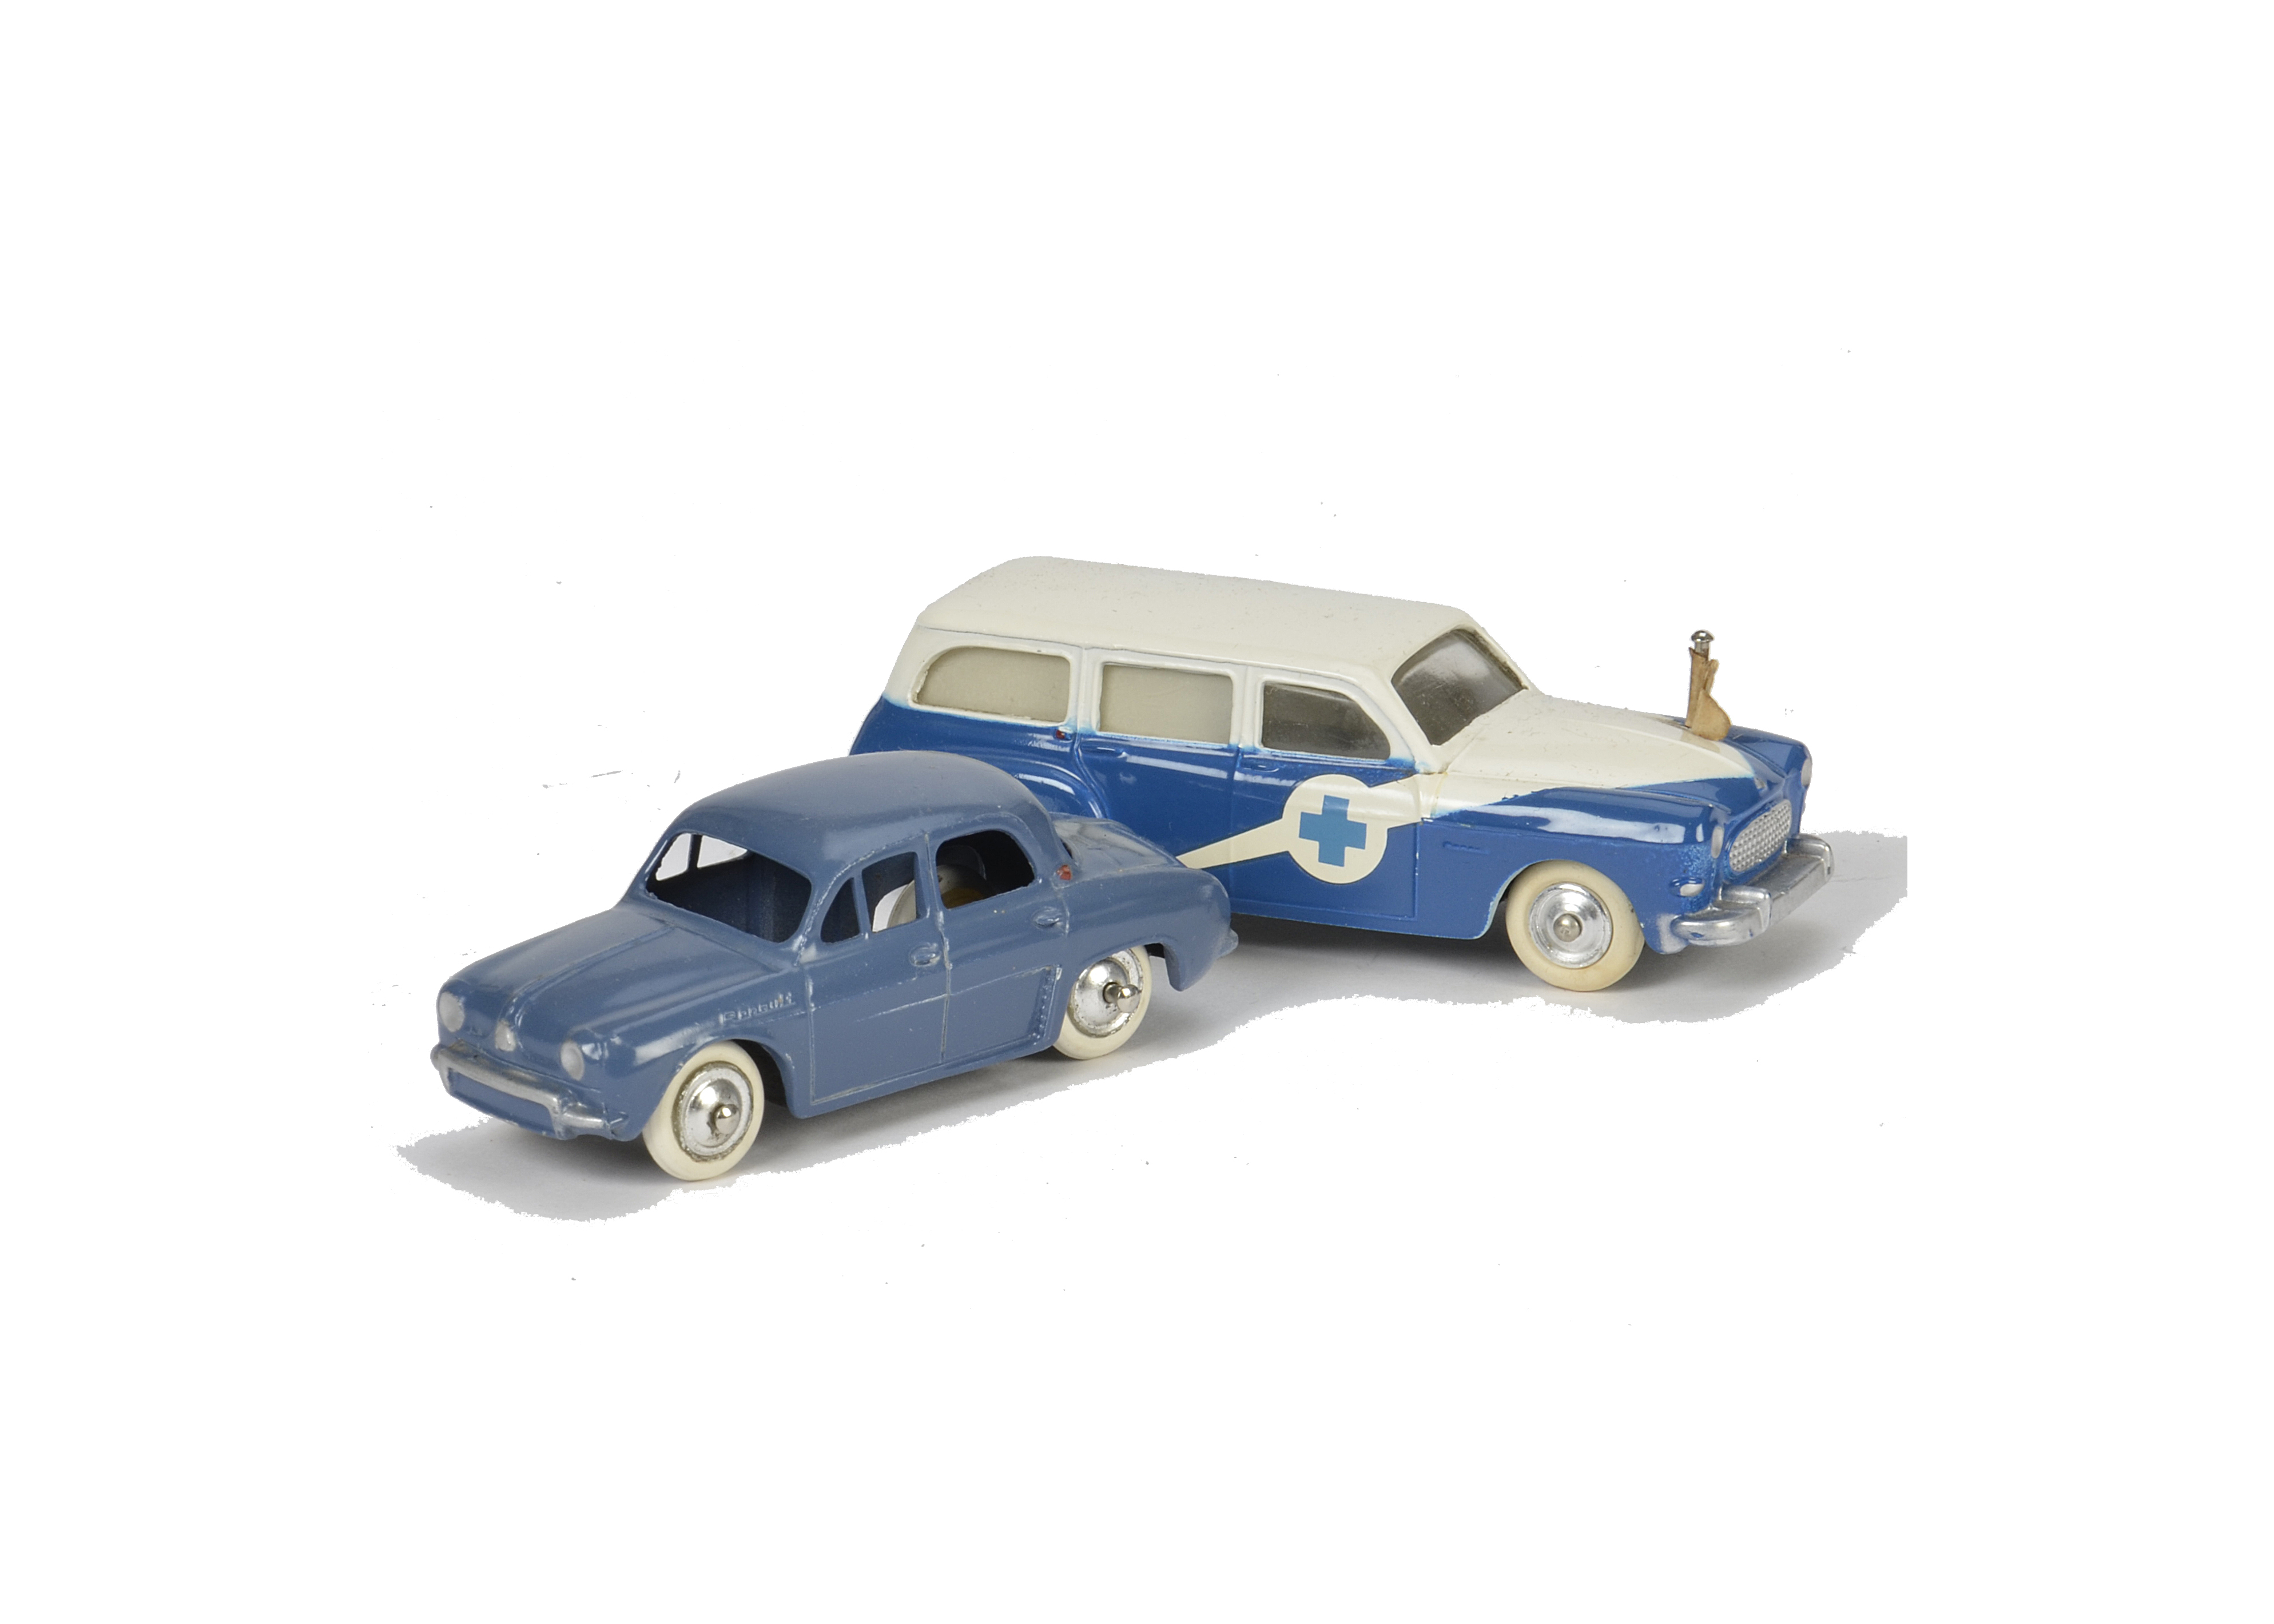 CIJ, No.3/53 Renault Private Ambulance, blue/white body, plated plastic hubs, white tyres, flag